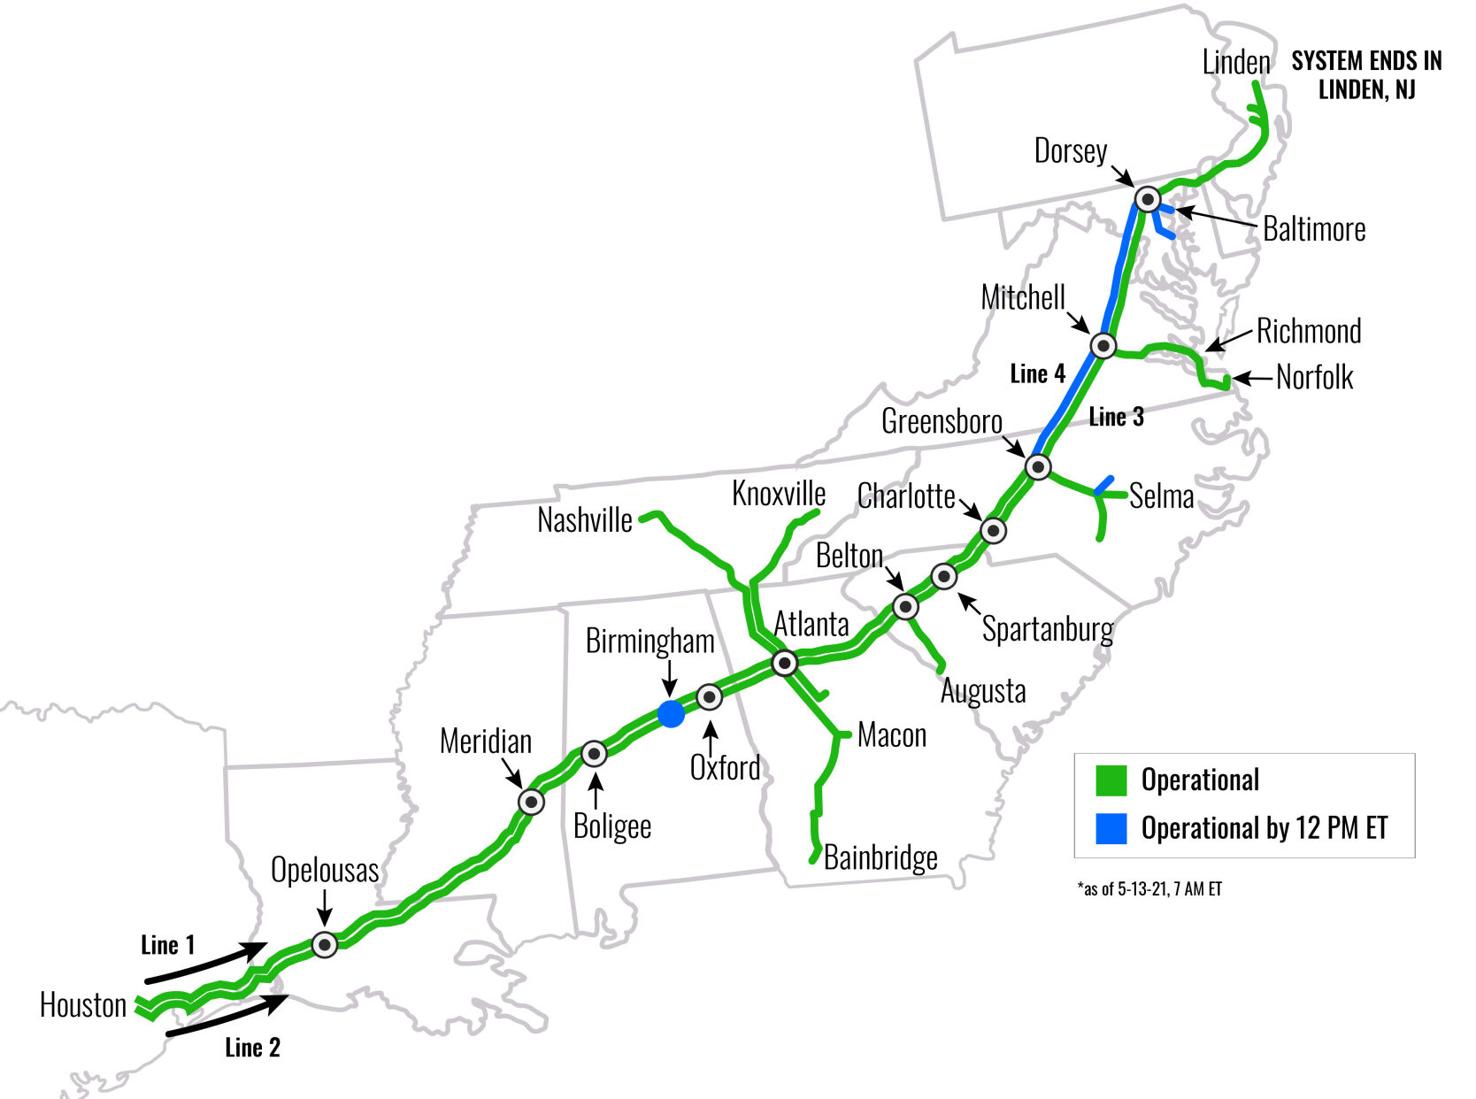 colonial pipeline map